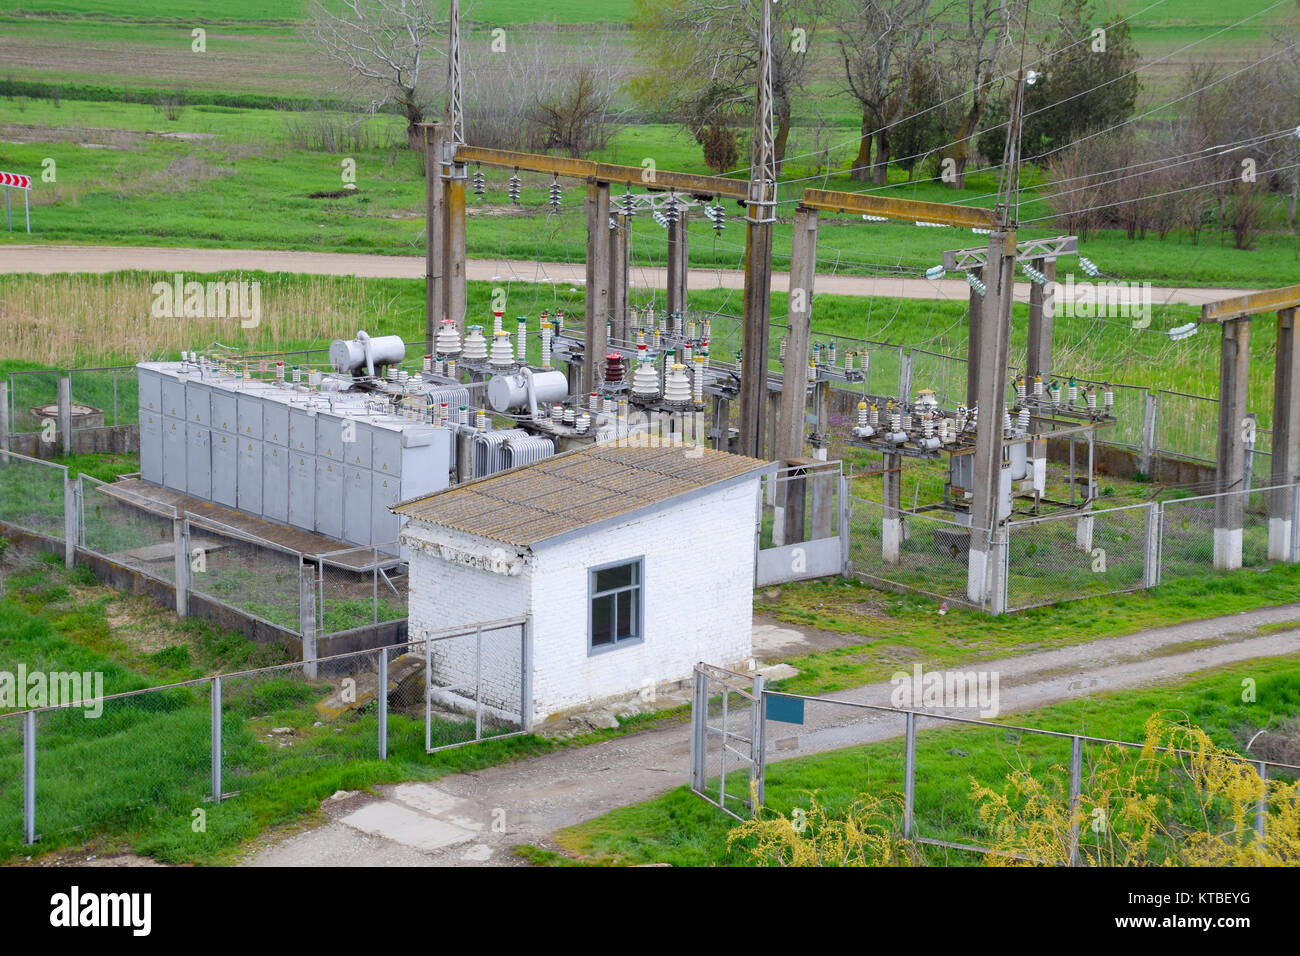 Electrical substation for power supply to an industrial facility Stock Photo